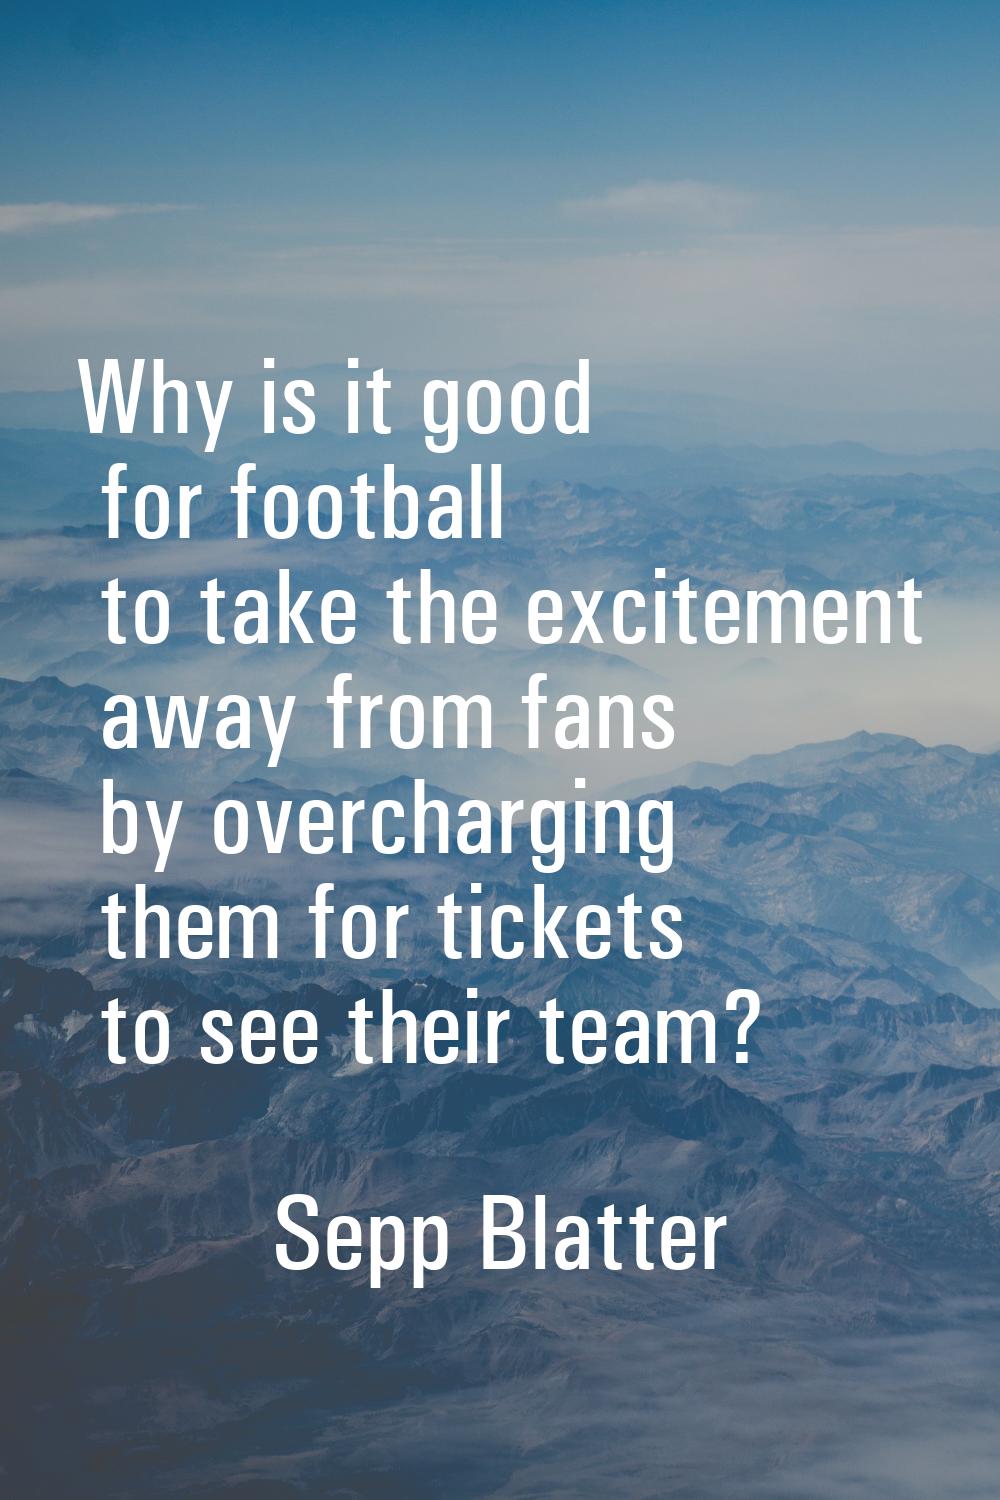 Why is it good for football to take the excitement away from fans by overcharging them for tickets 